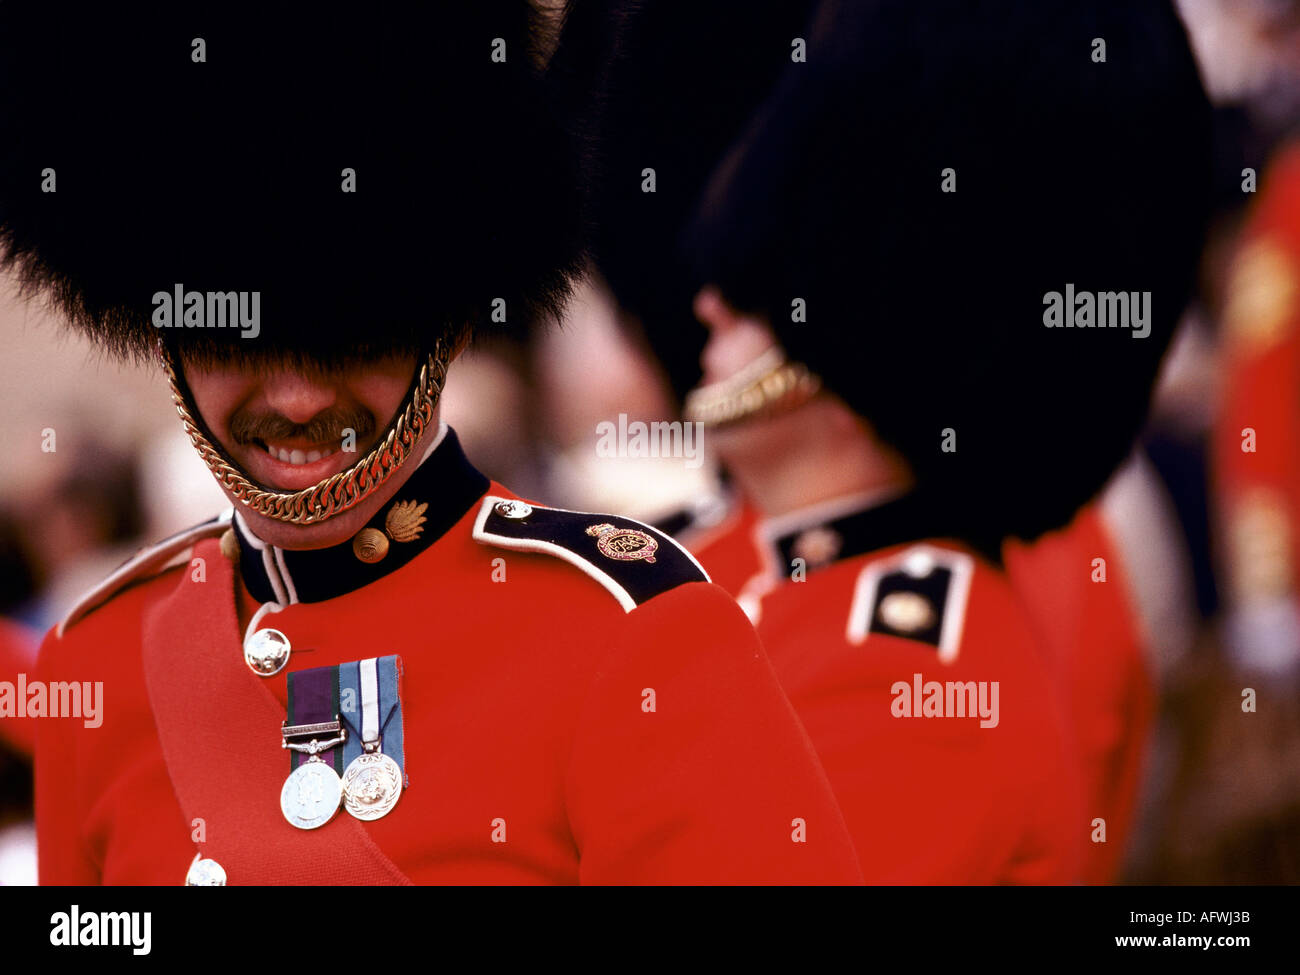 UK soldier wearing his medals Trooping the Colour, Horse Guards Parade. British soldiers in ceremonial uniform London June 1985. 1980s HOMER SYKES Stock Photo